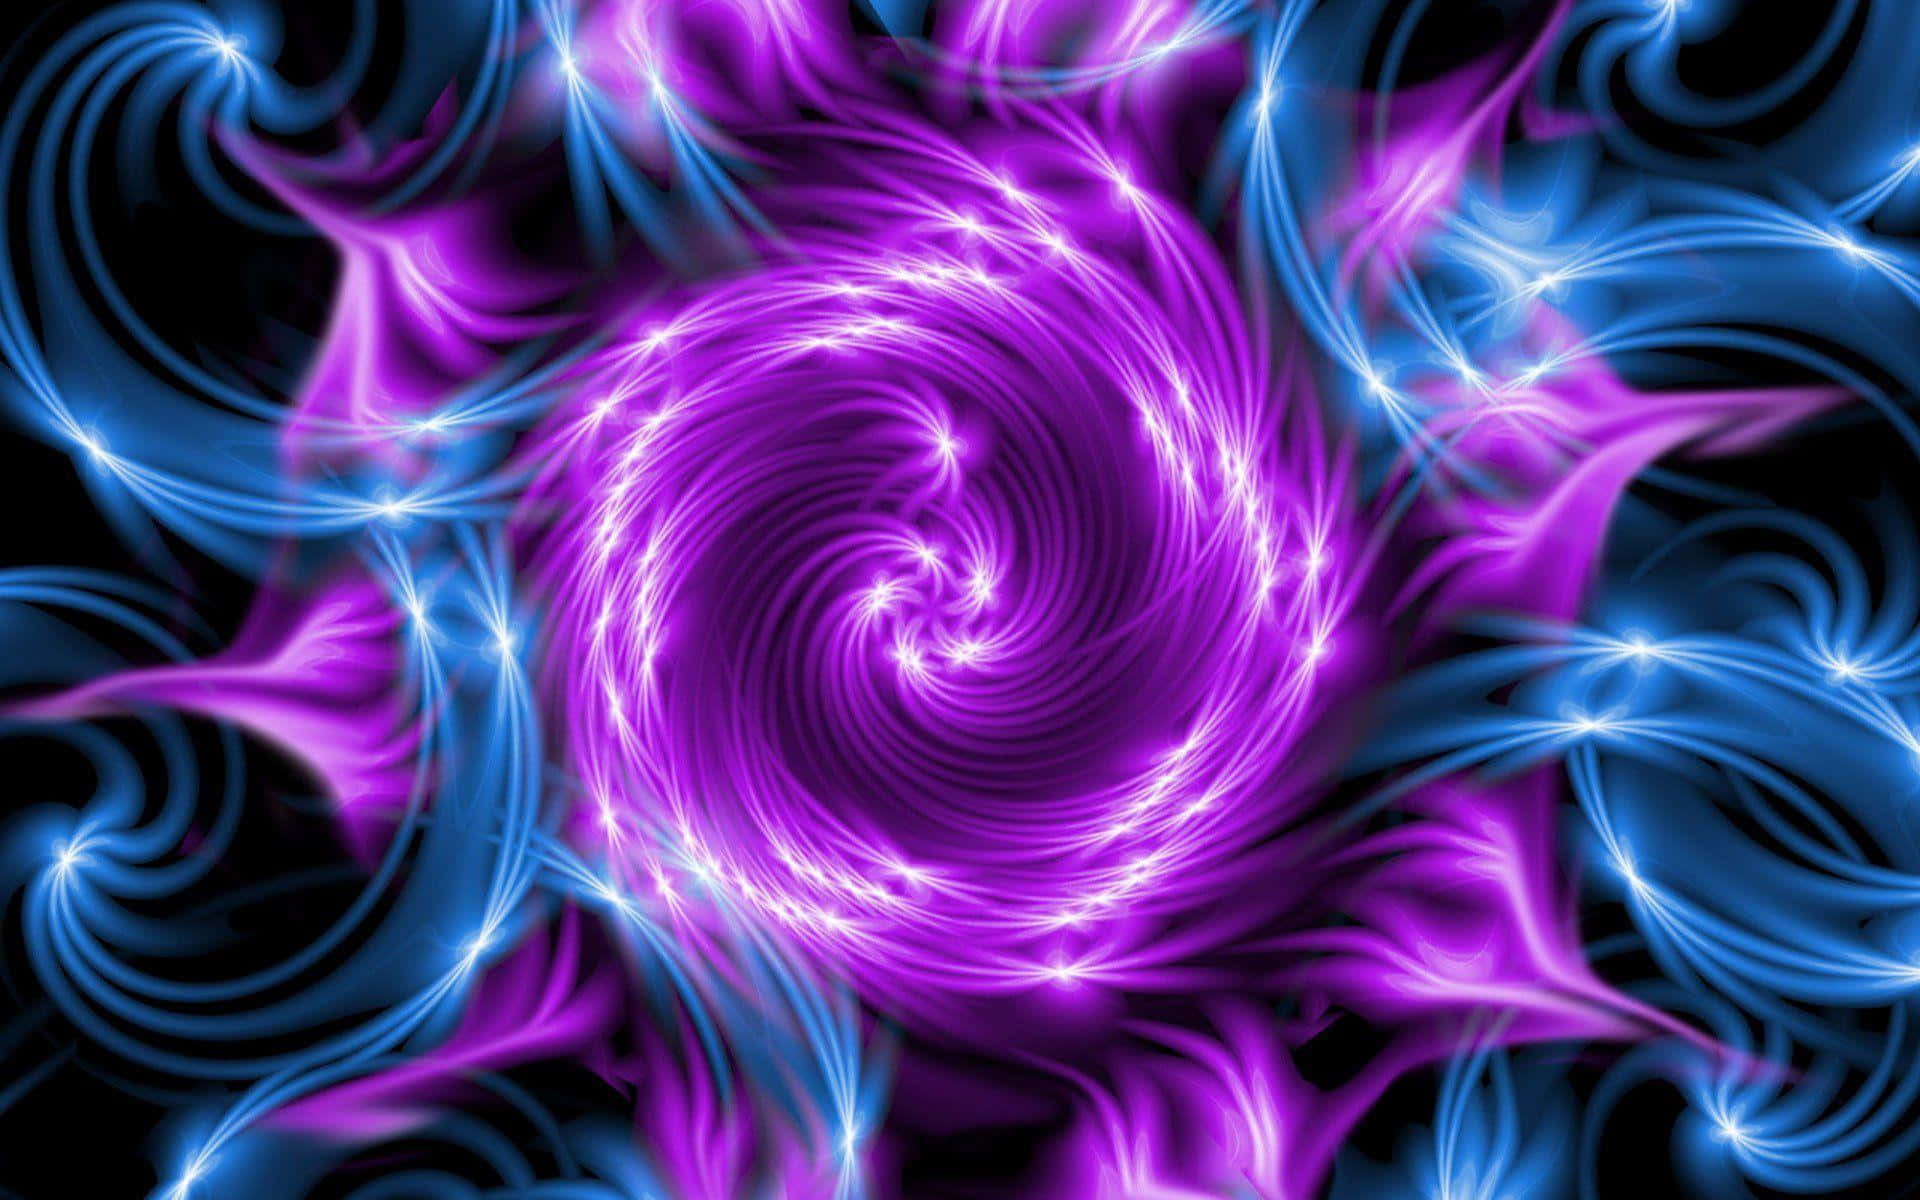 Purple And Blue Swirling Spiral Wallpaper